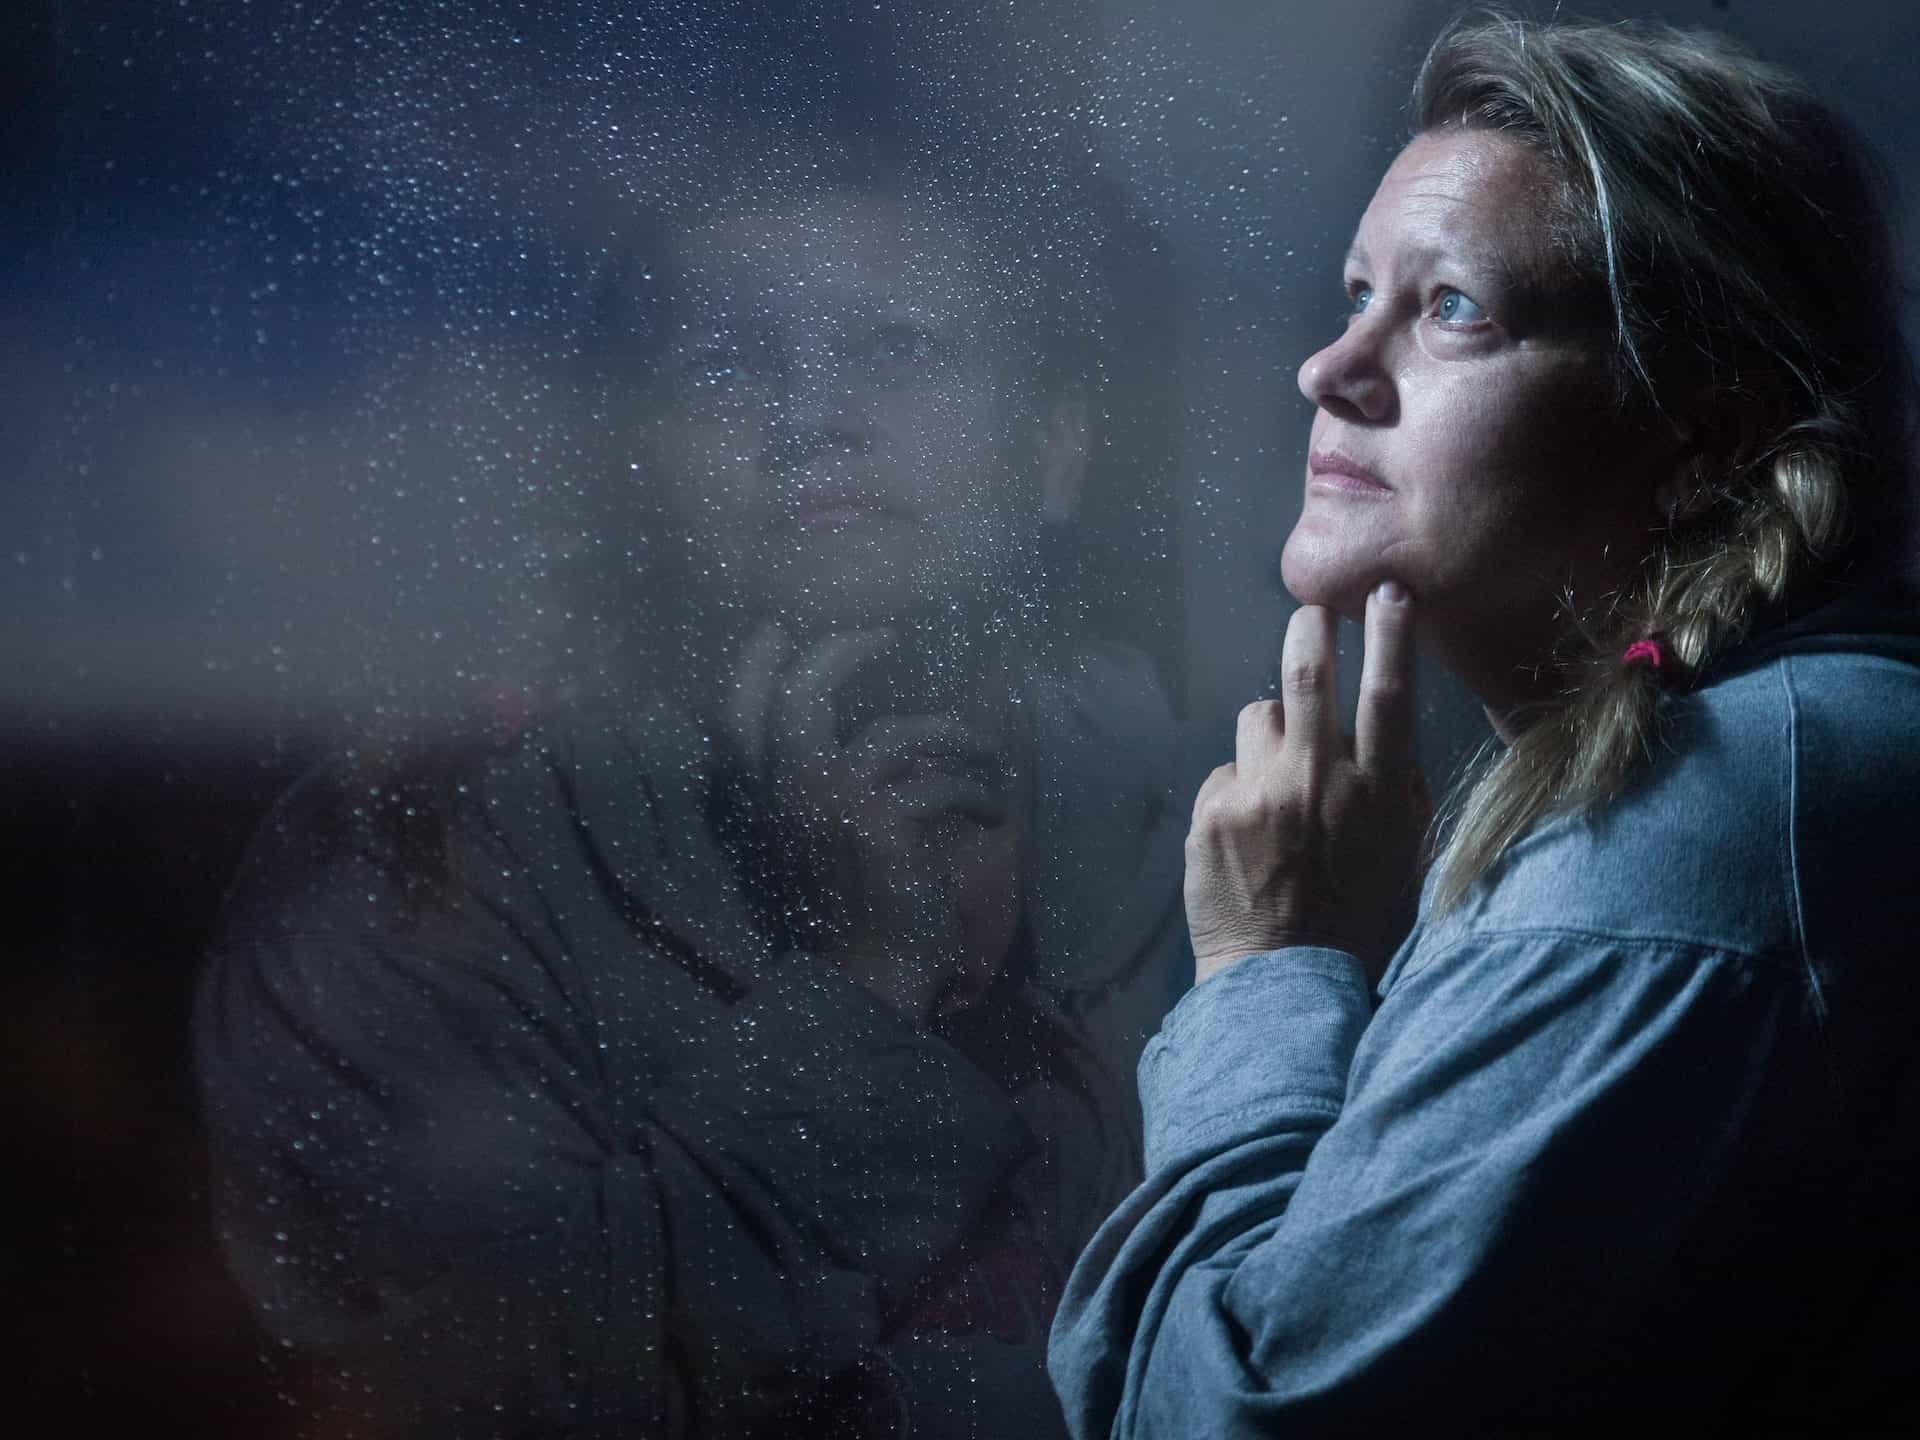 Contemplative woman in blue shirt looking out window with reflection.